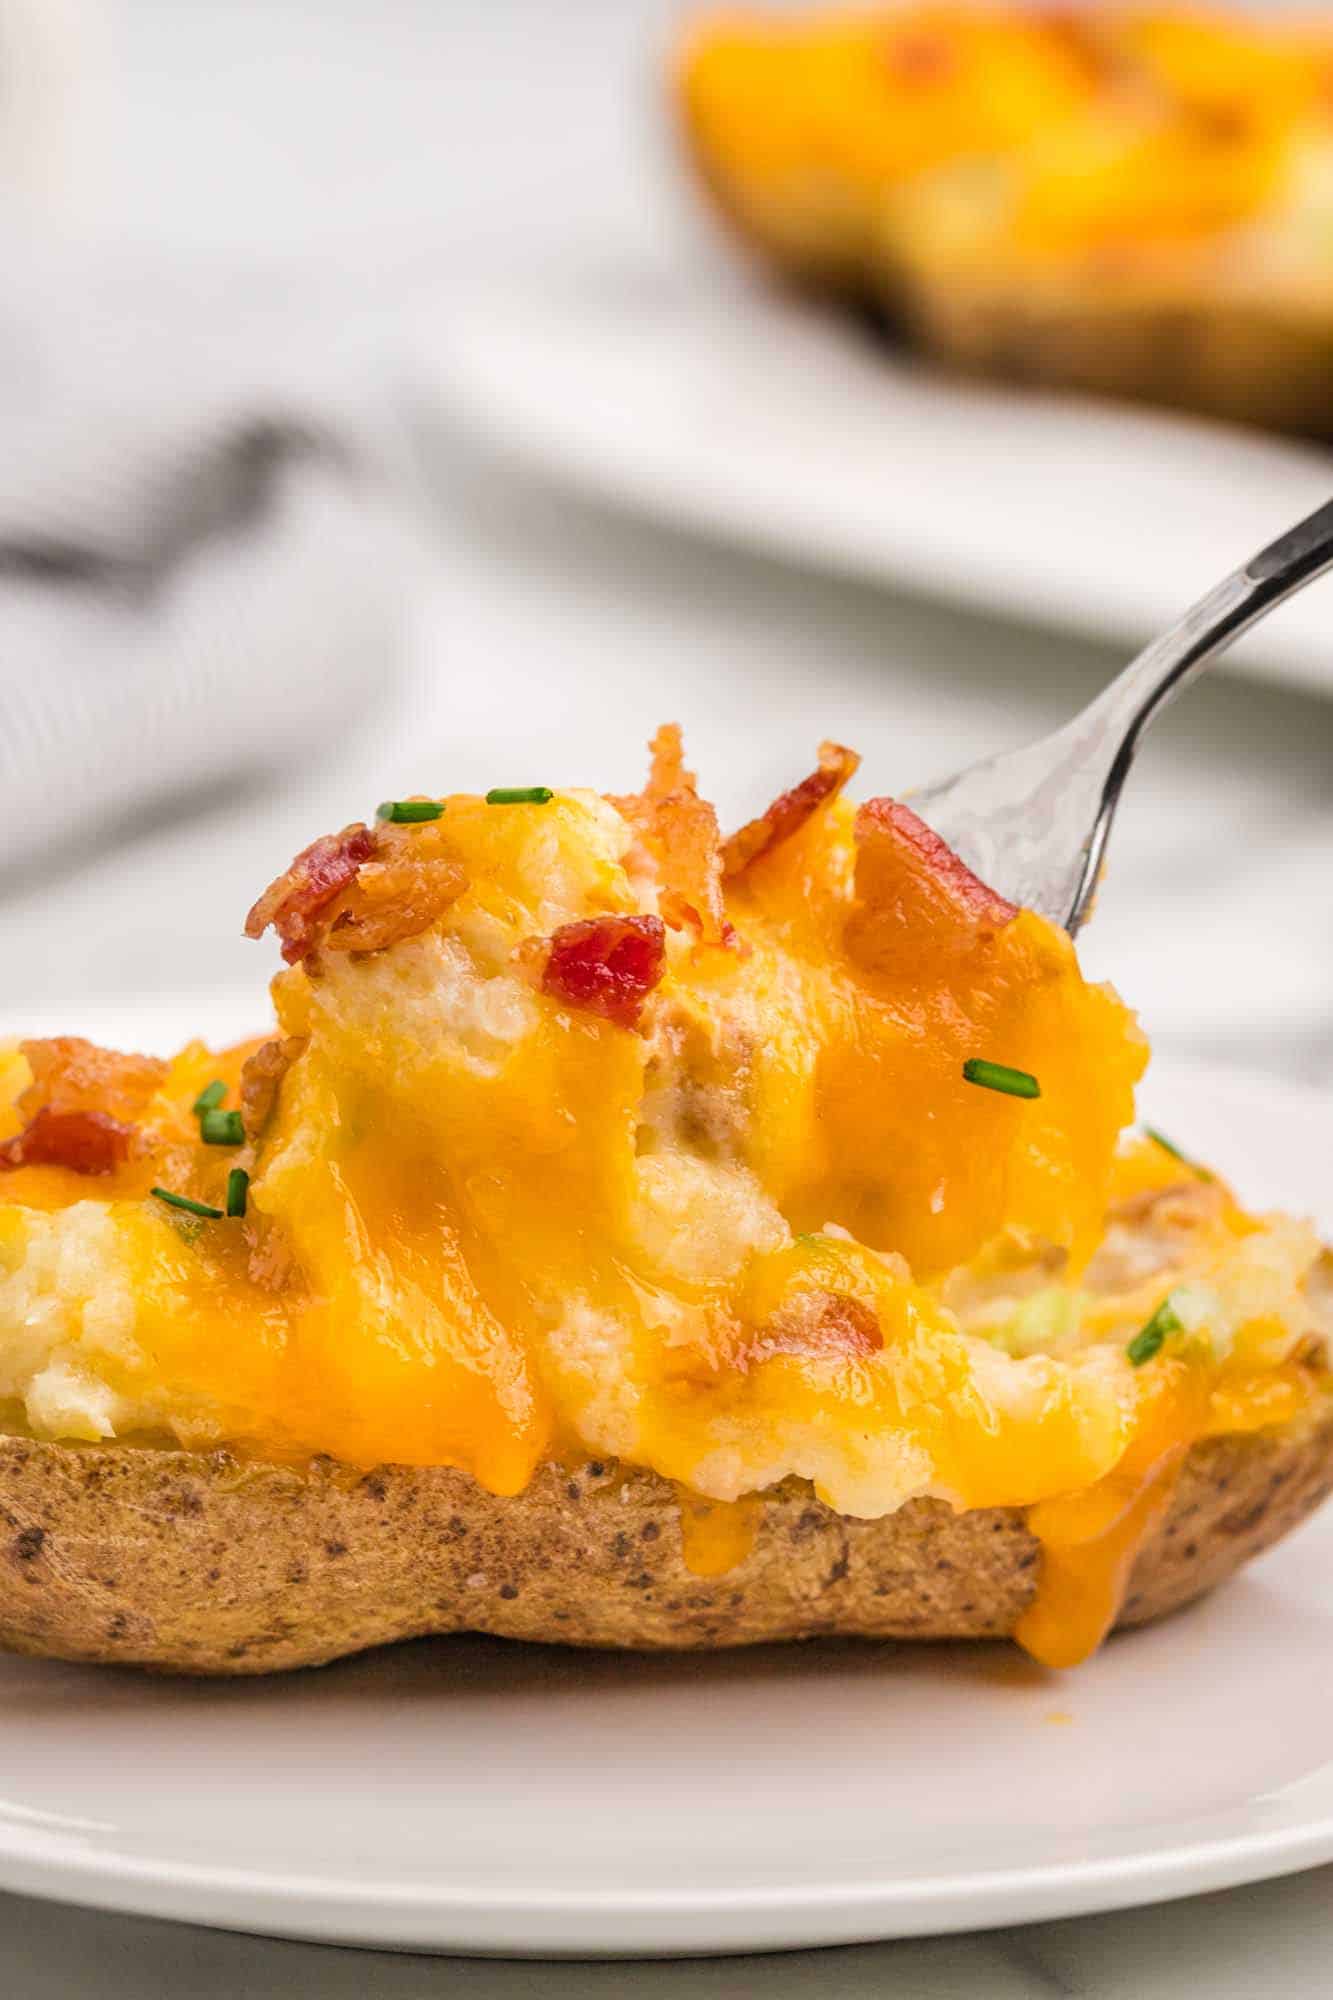 Eating twice baked potatoes with a fork